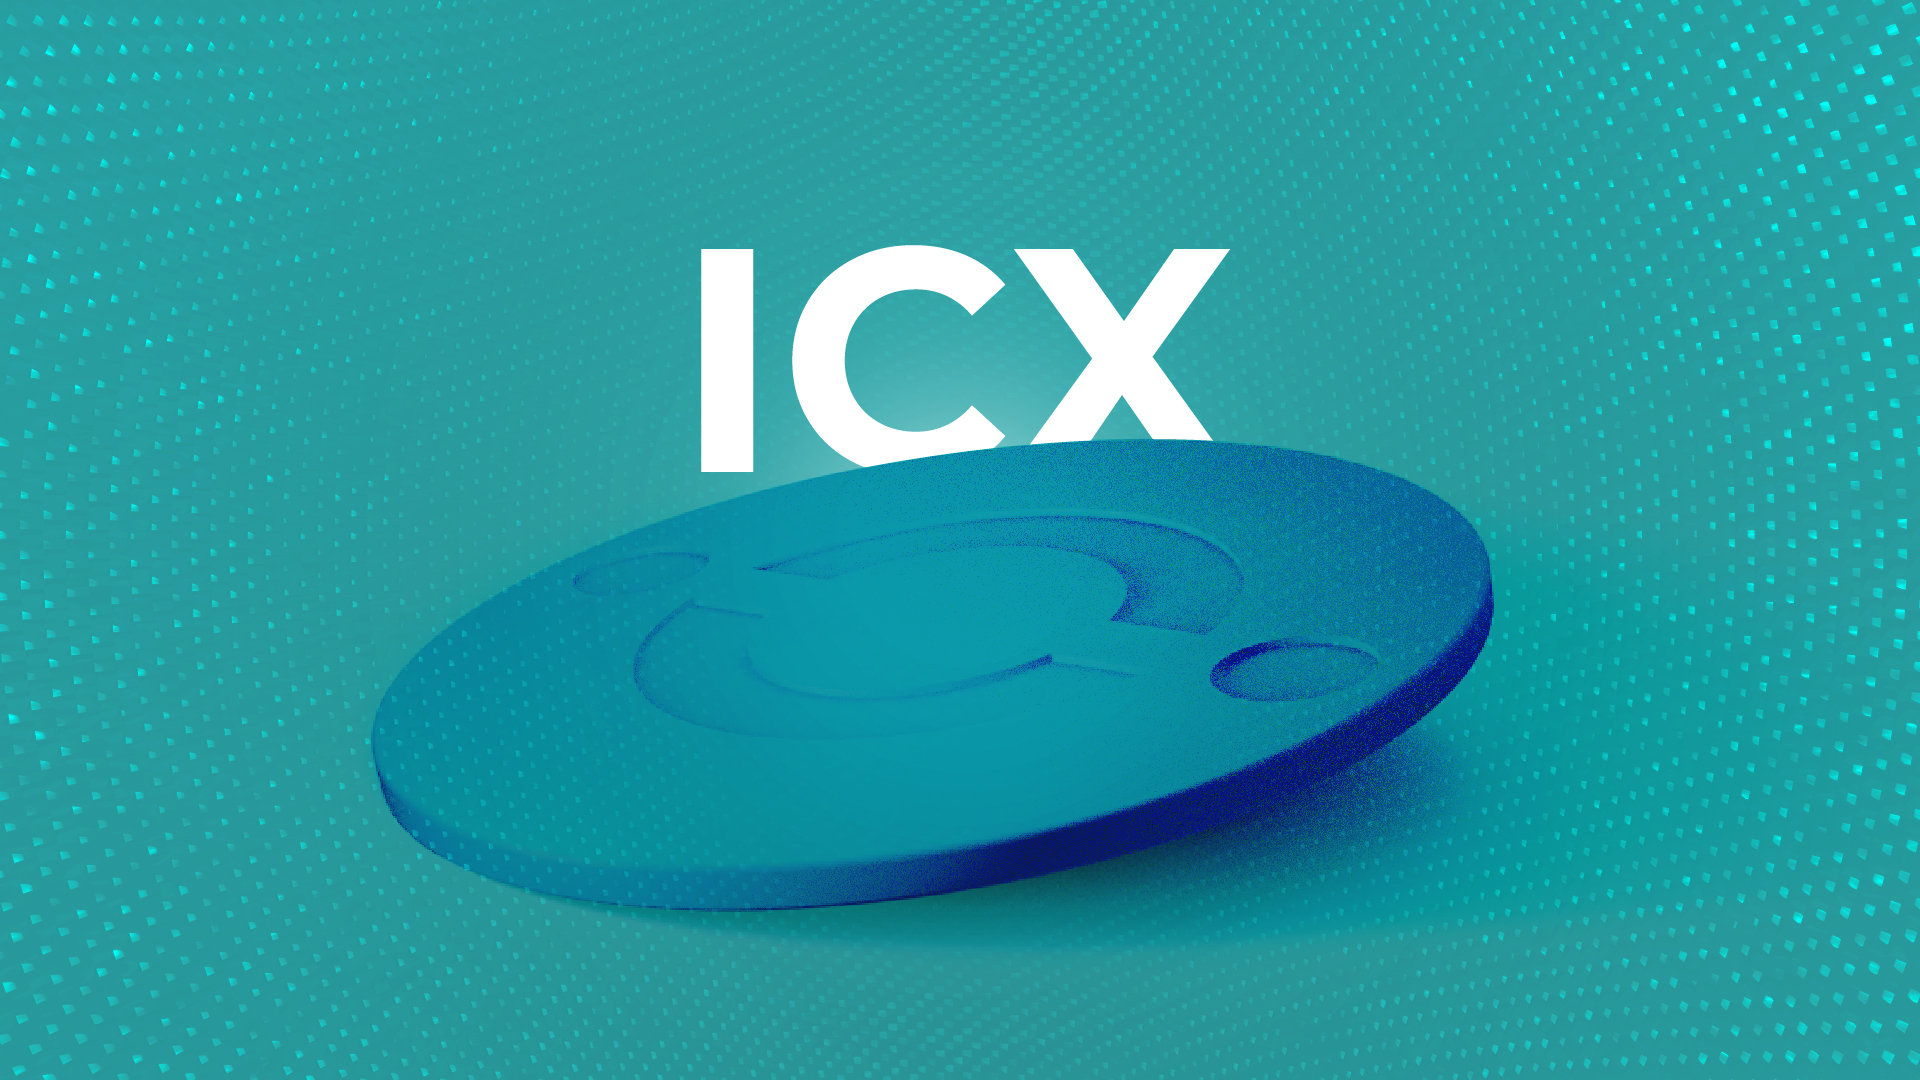 ICX is the currency of all applications that are built on the ICON blockchain.